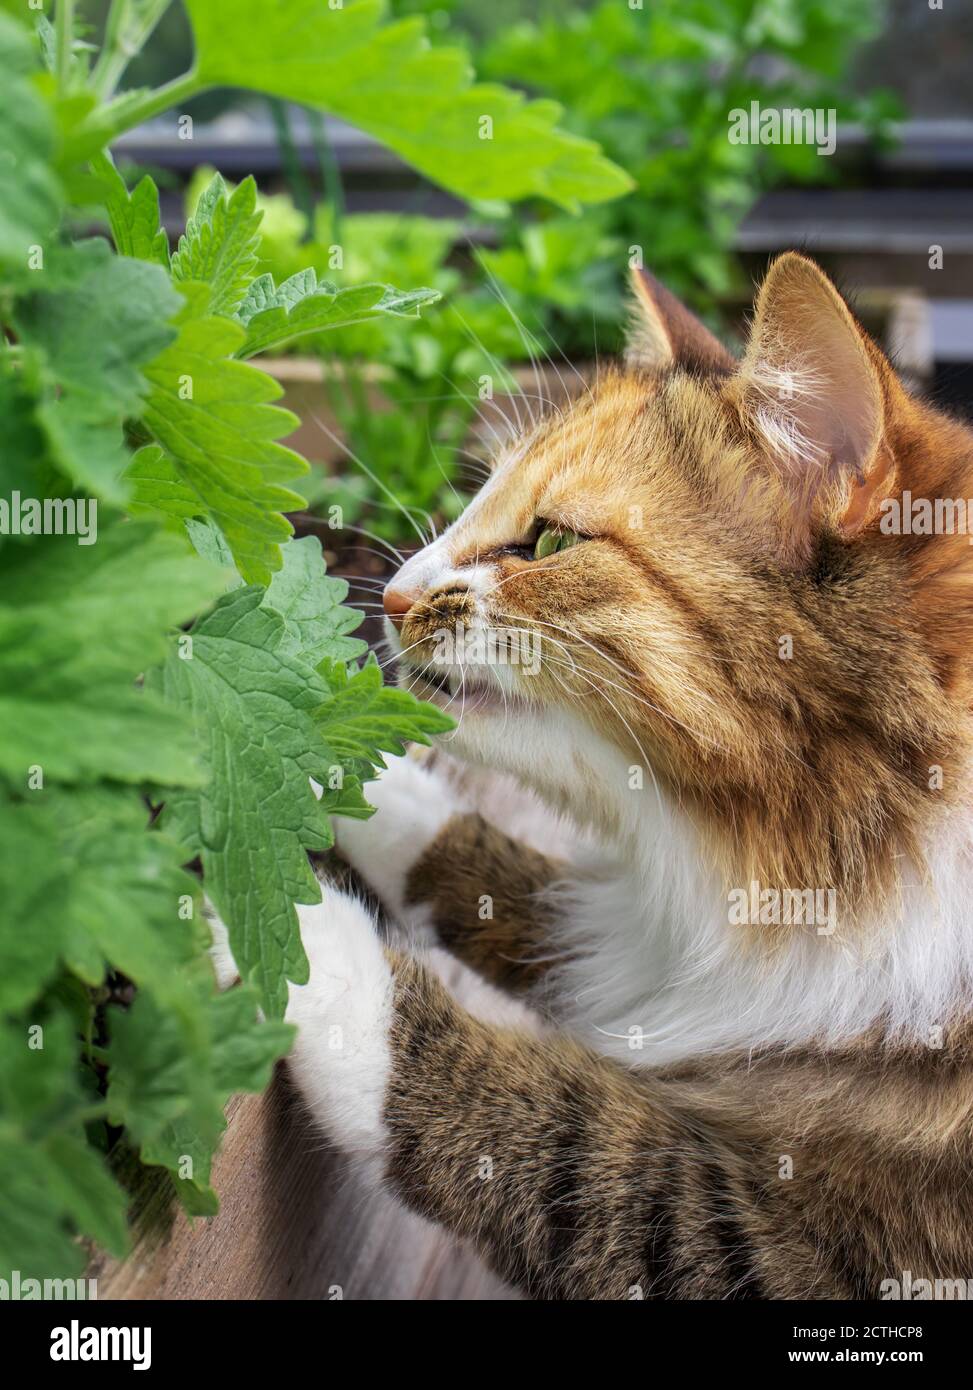 Cat sniffing on catnip leaves/plant, outside. Focus on cat. Blurred foreground leaves with soft background. Cat is standing on hind legs. Stock Photo